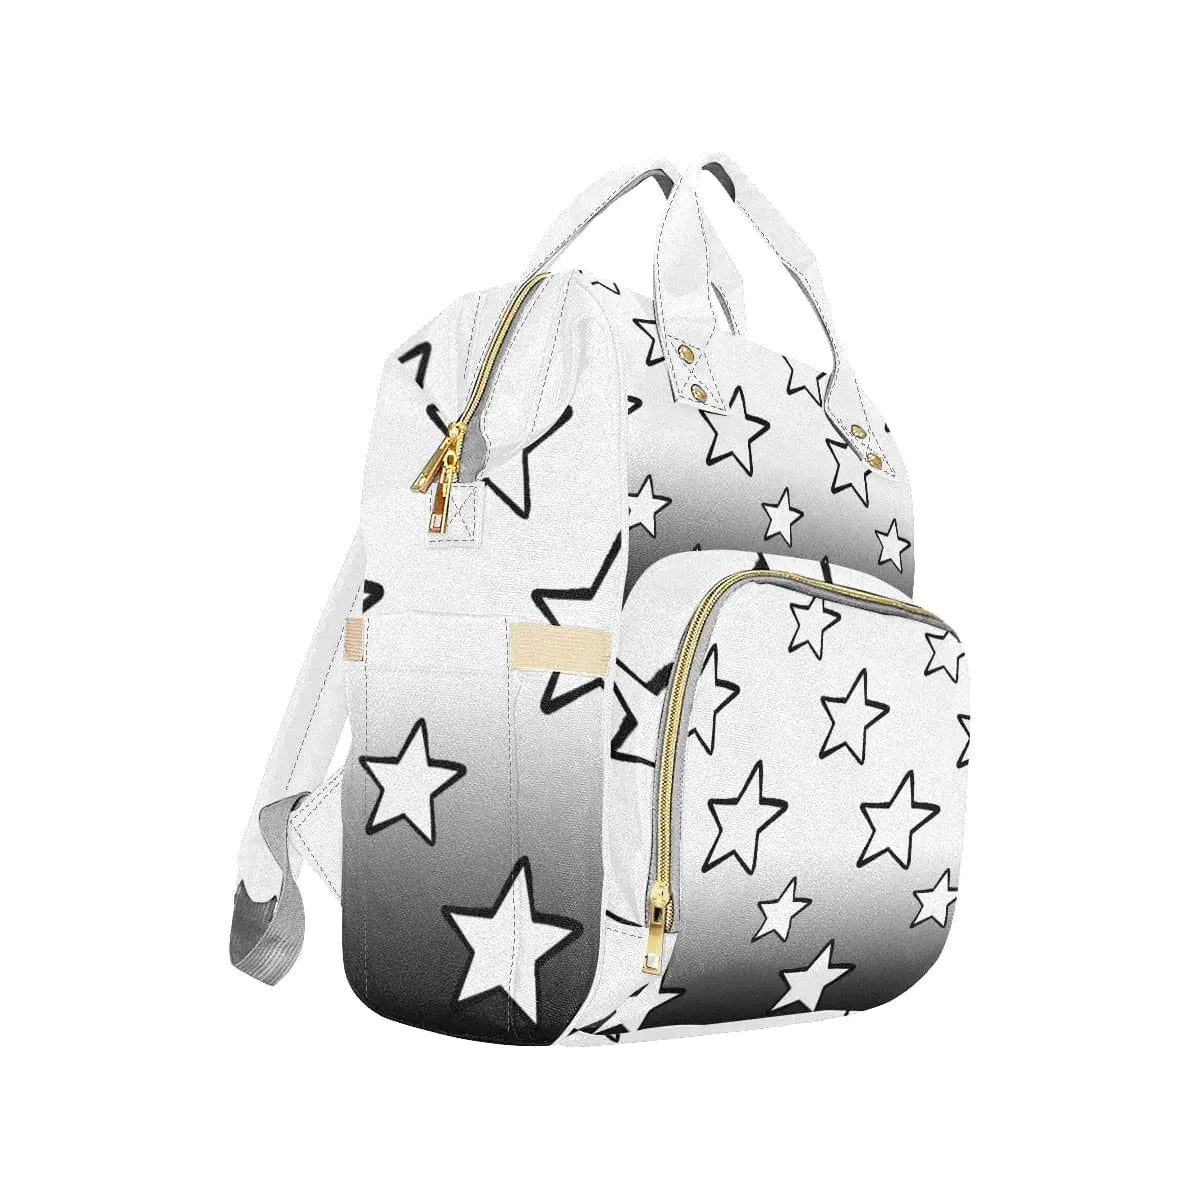 Stardust One Size Faded Stars Chic Backpack by Stardust